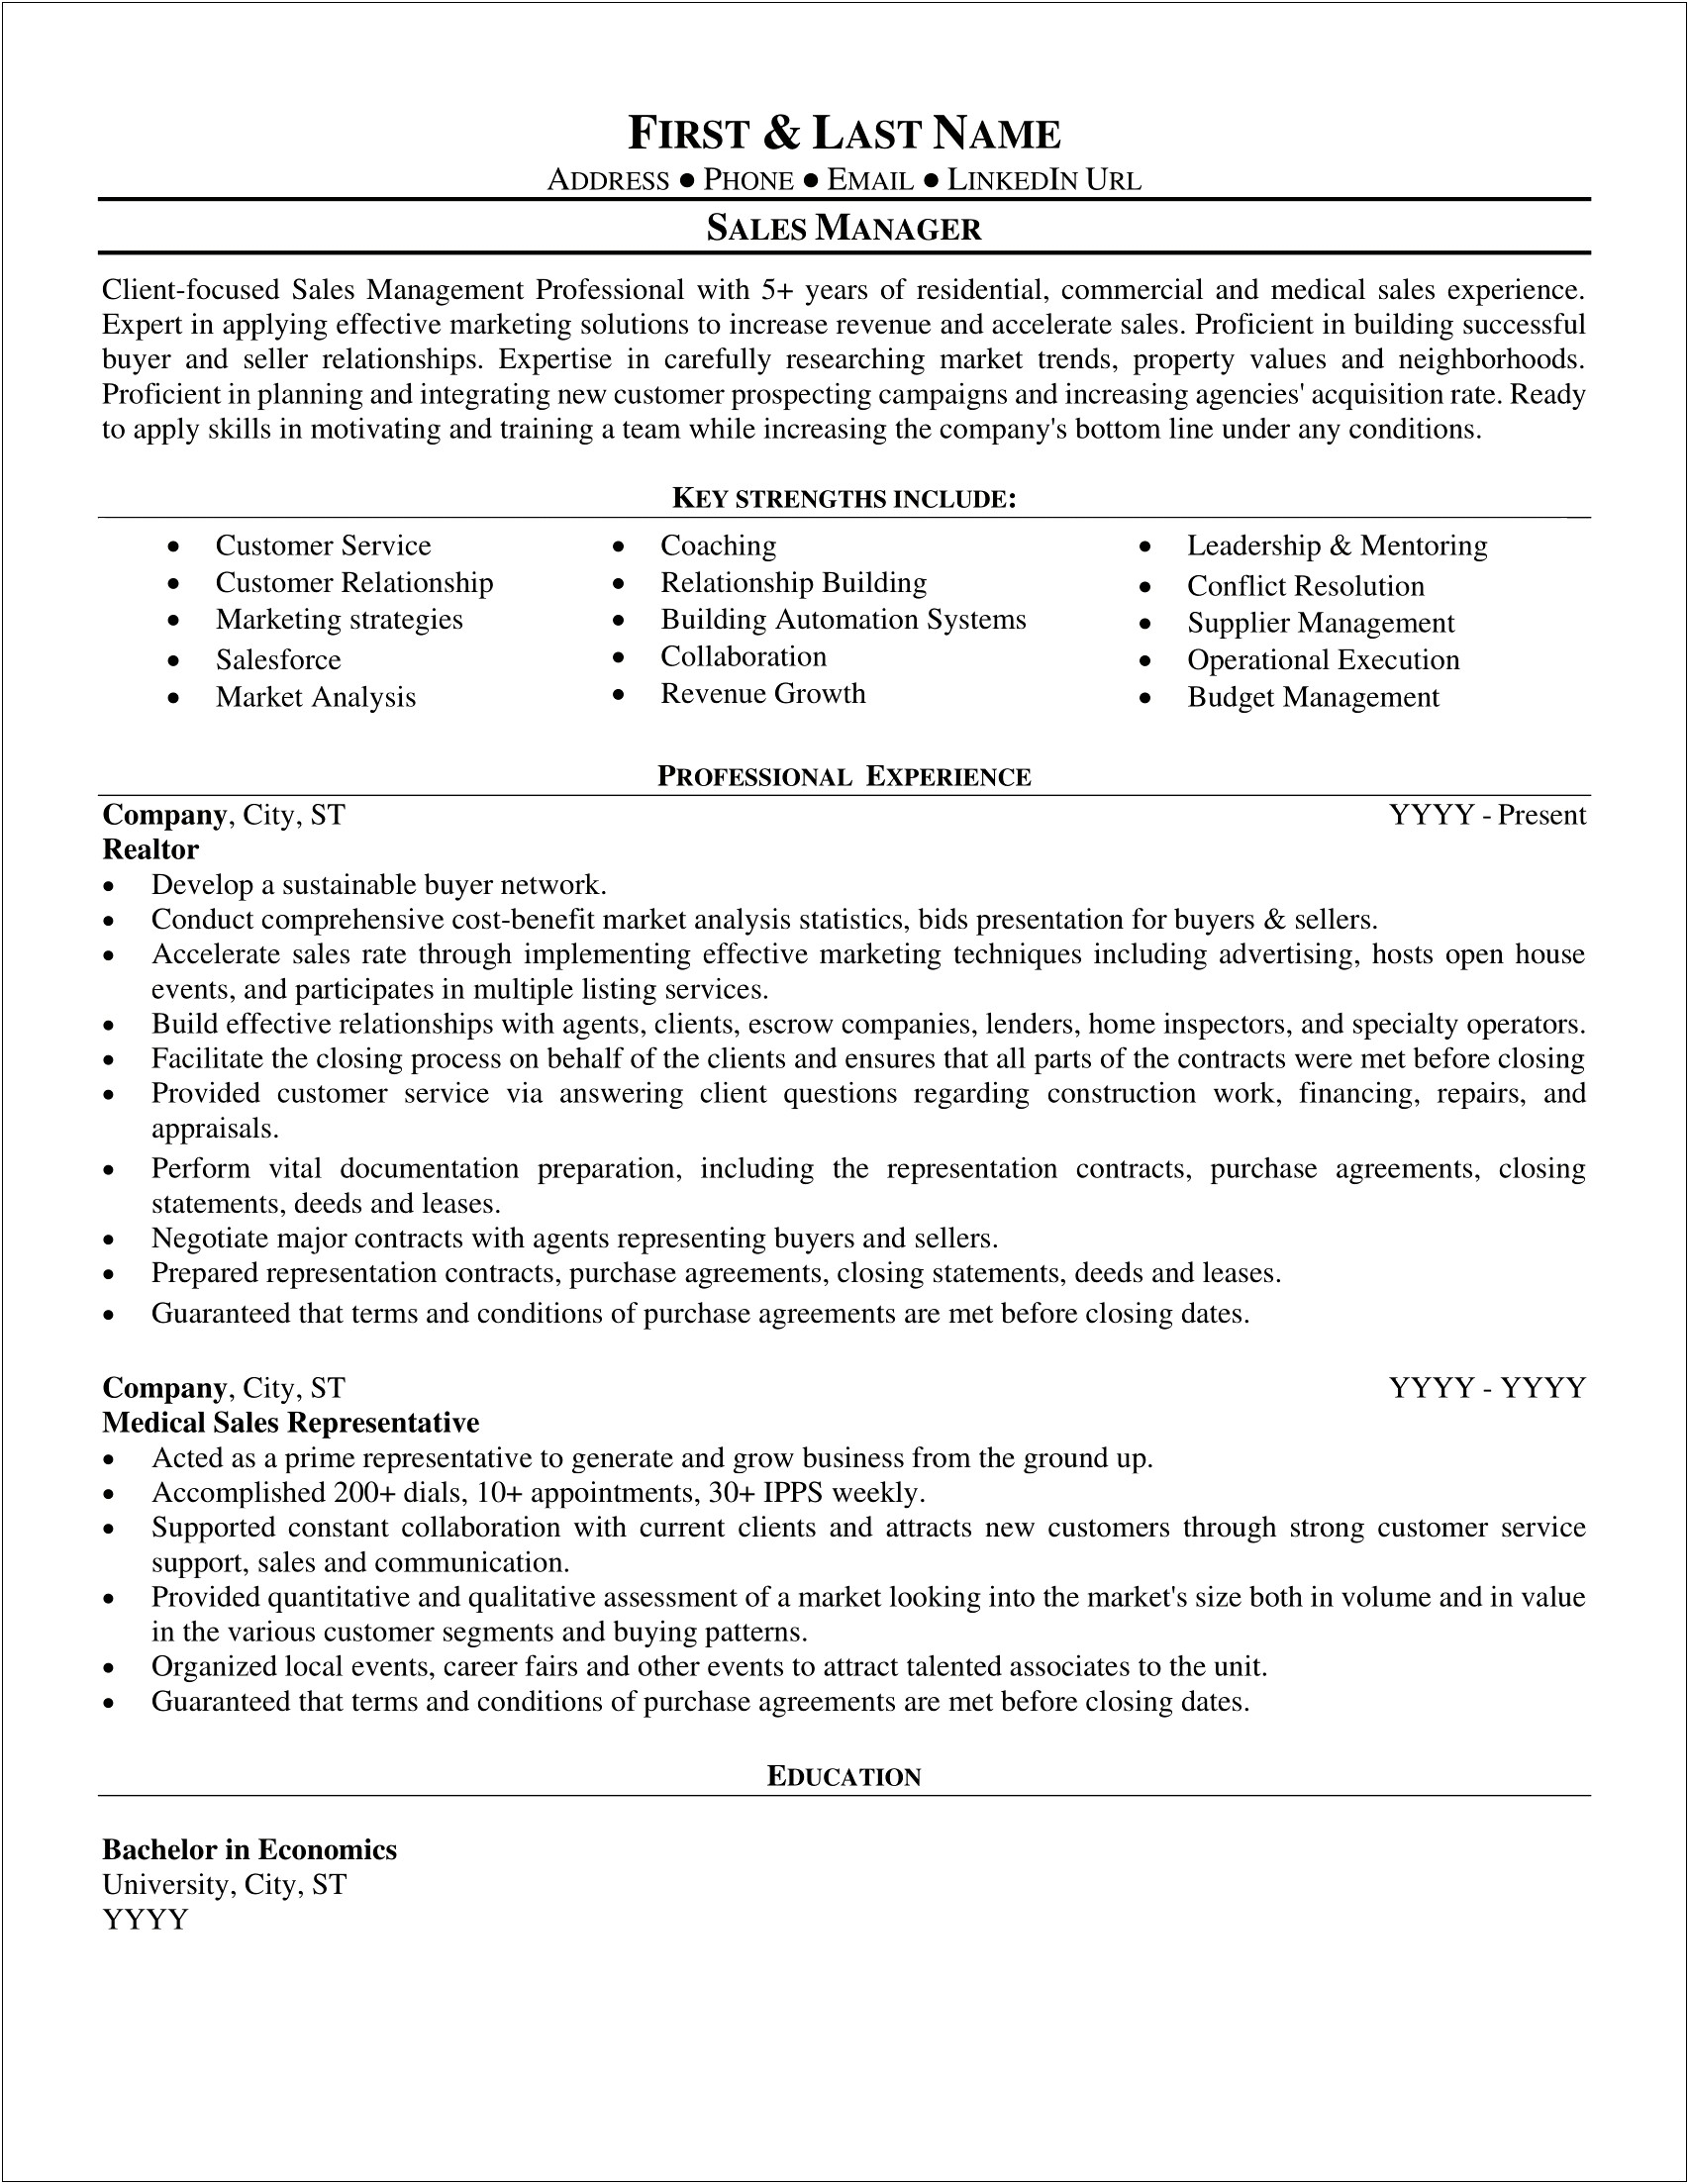 Resume Words For Sales Manager